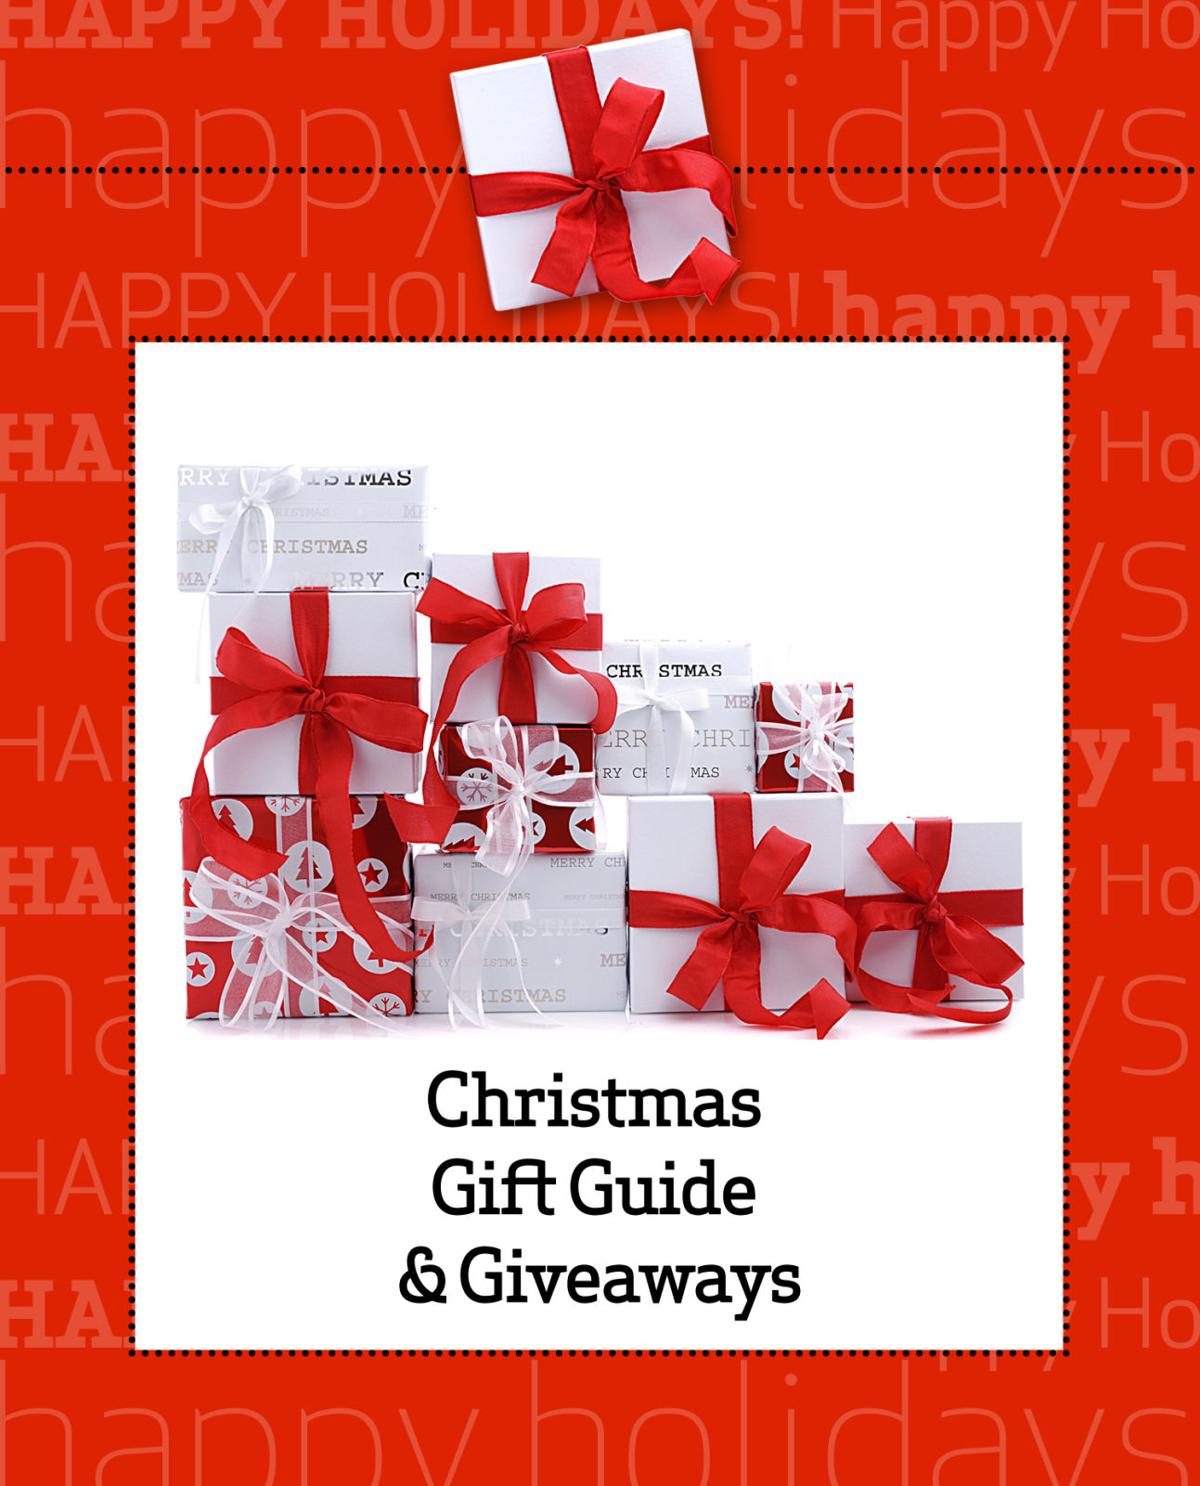 Christmas Gift Guide and Giveaways Winners Announced! Promotions